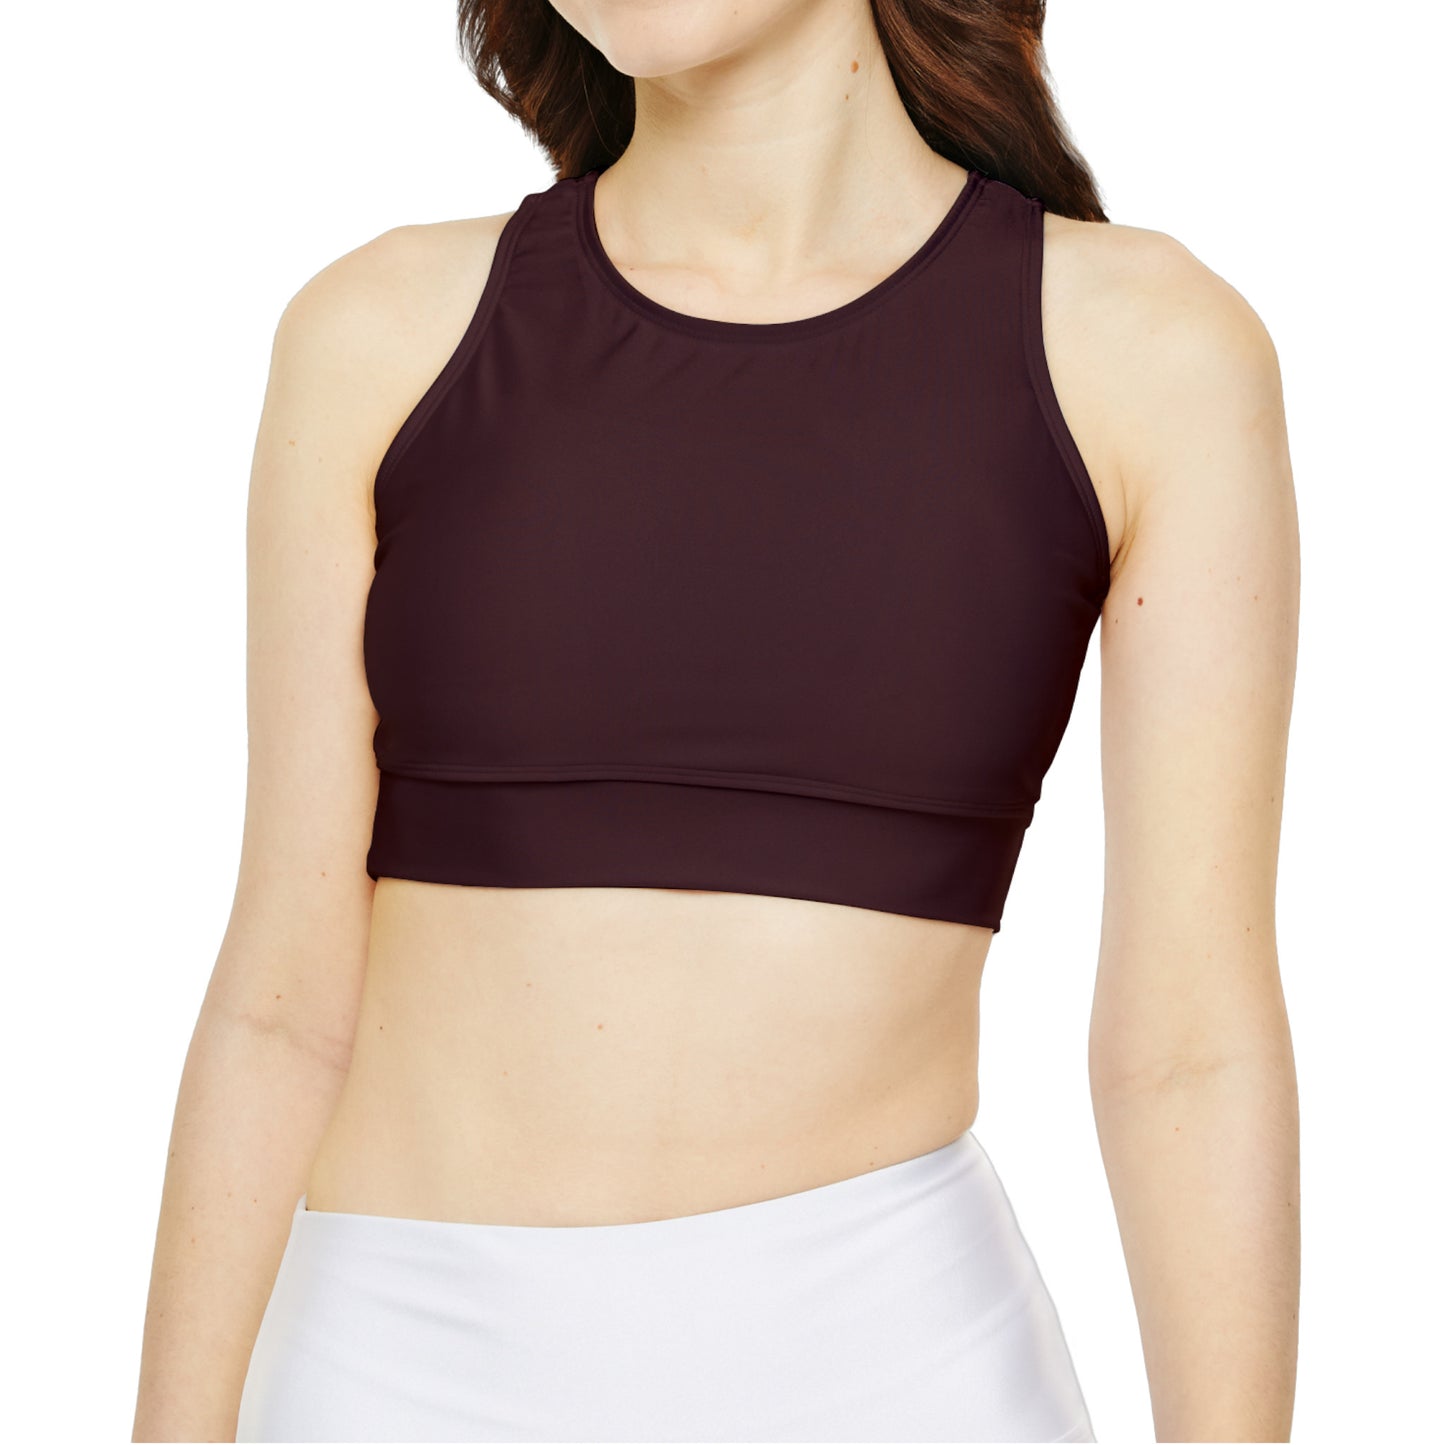 Chocolate Brown Fully Lined, Padded Sports Bra